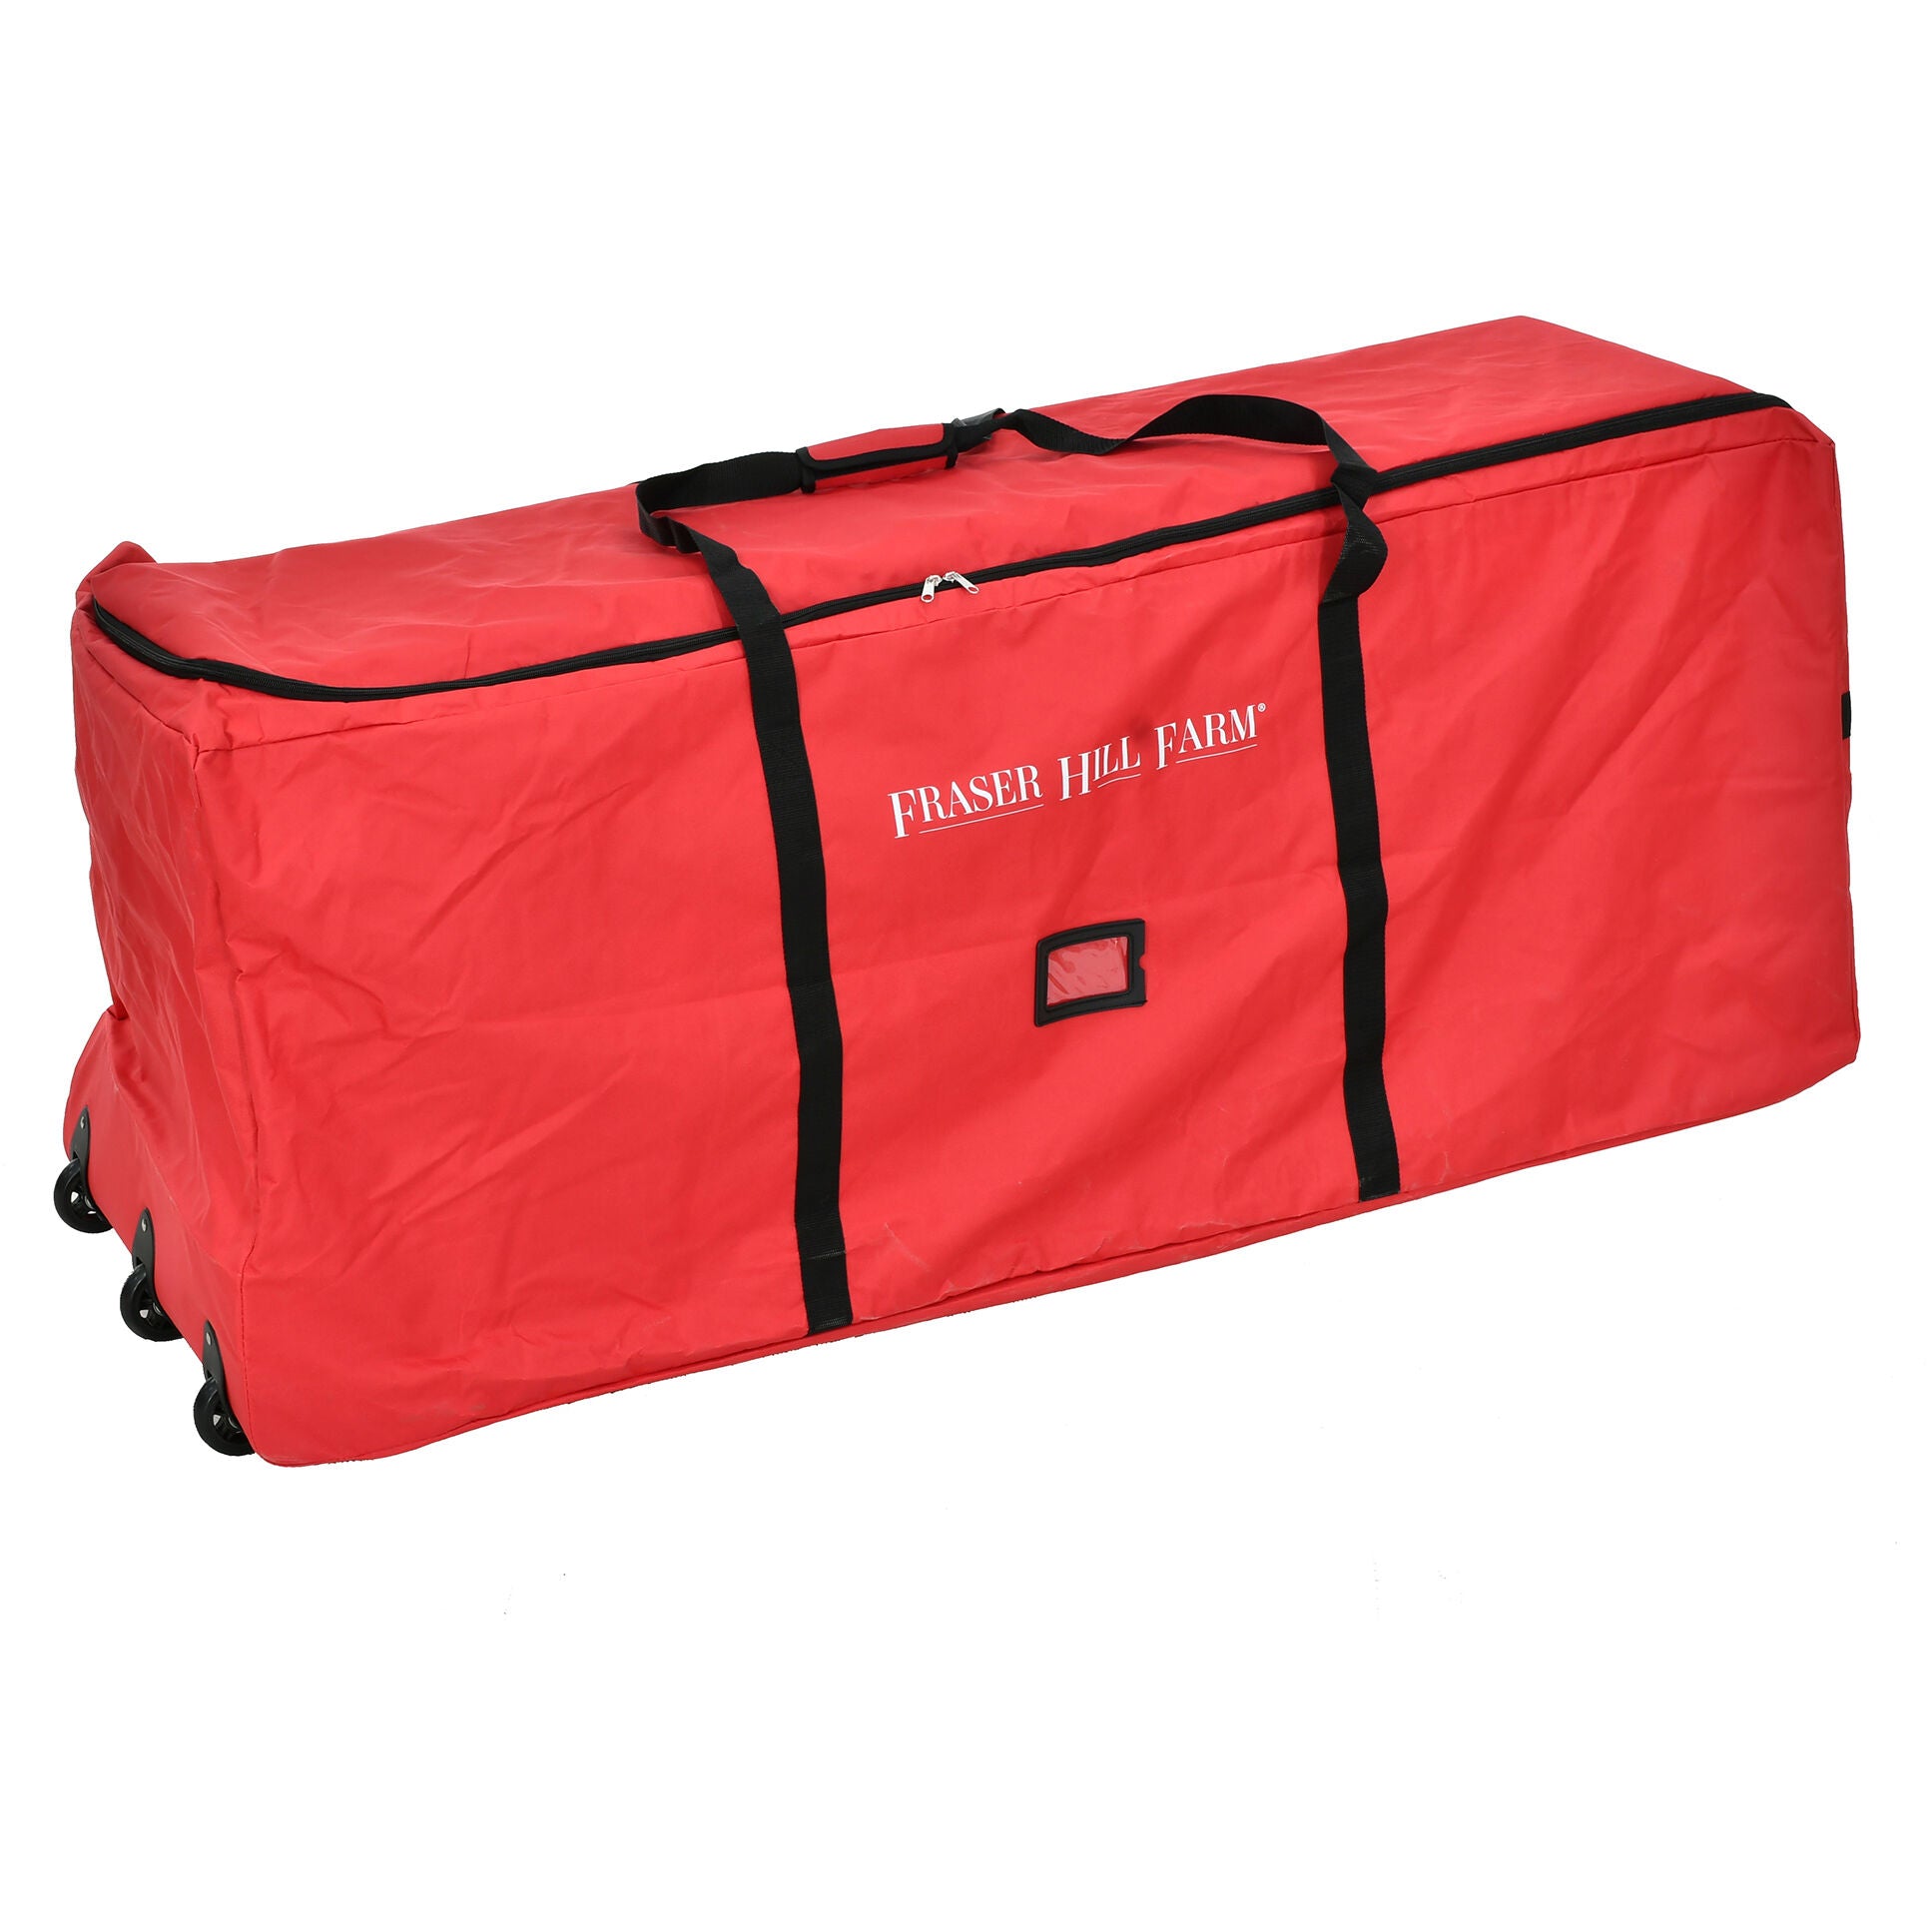 Fraser Hill Farm -  3-Wheel Rolling Storage Bag for Christmas Trees Up To 9 Feet, Red